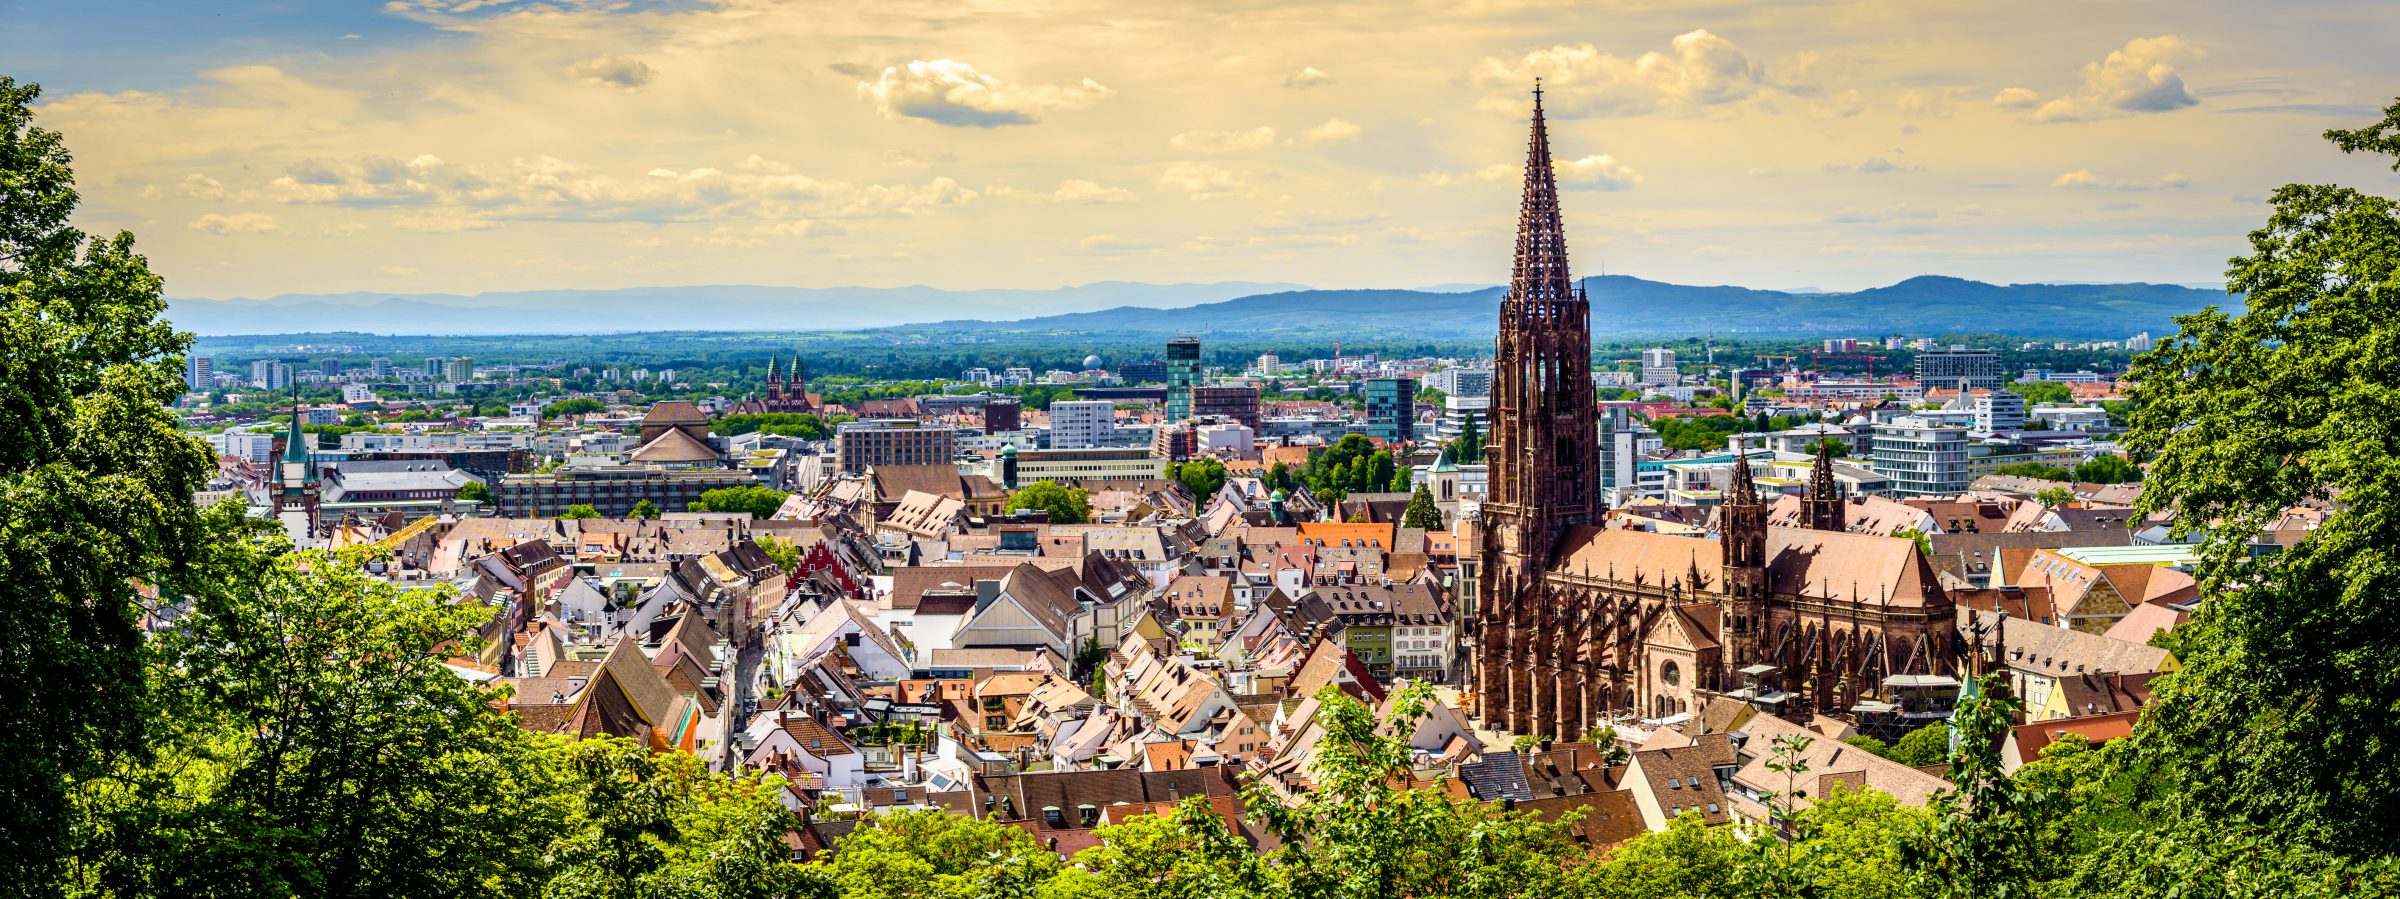 Historic,Buildings,At,The,Famous,Old,Town,Of,Freiburg,Im